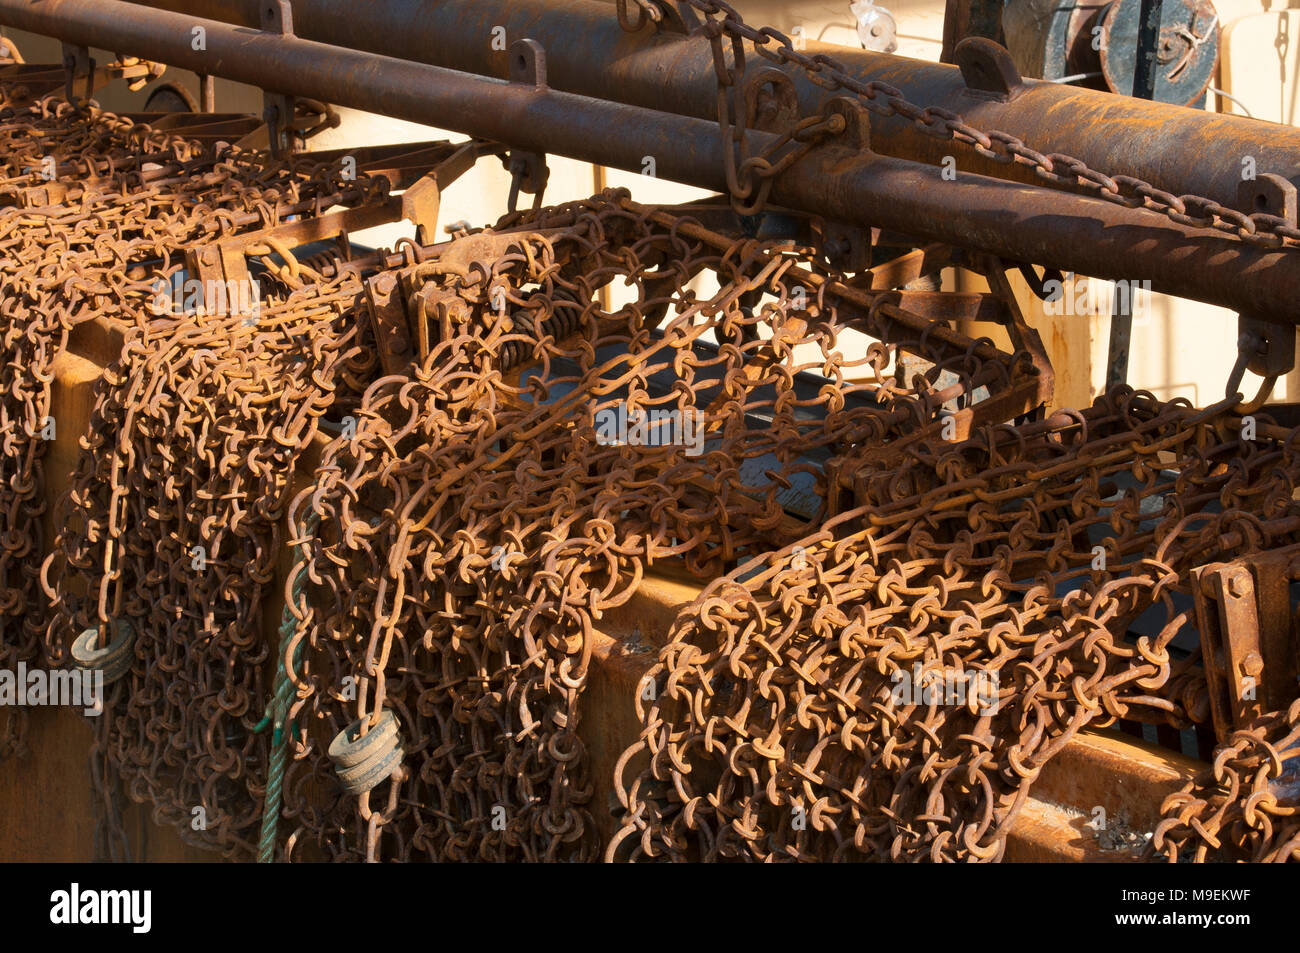 Chain mat, used for raking the sea-bed to disturb scallops, nephrops and flatfish from sediment, hanging over the edge of a fishing trawler boat. Stock Photo